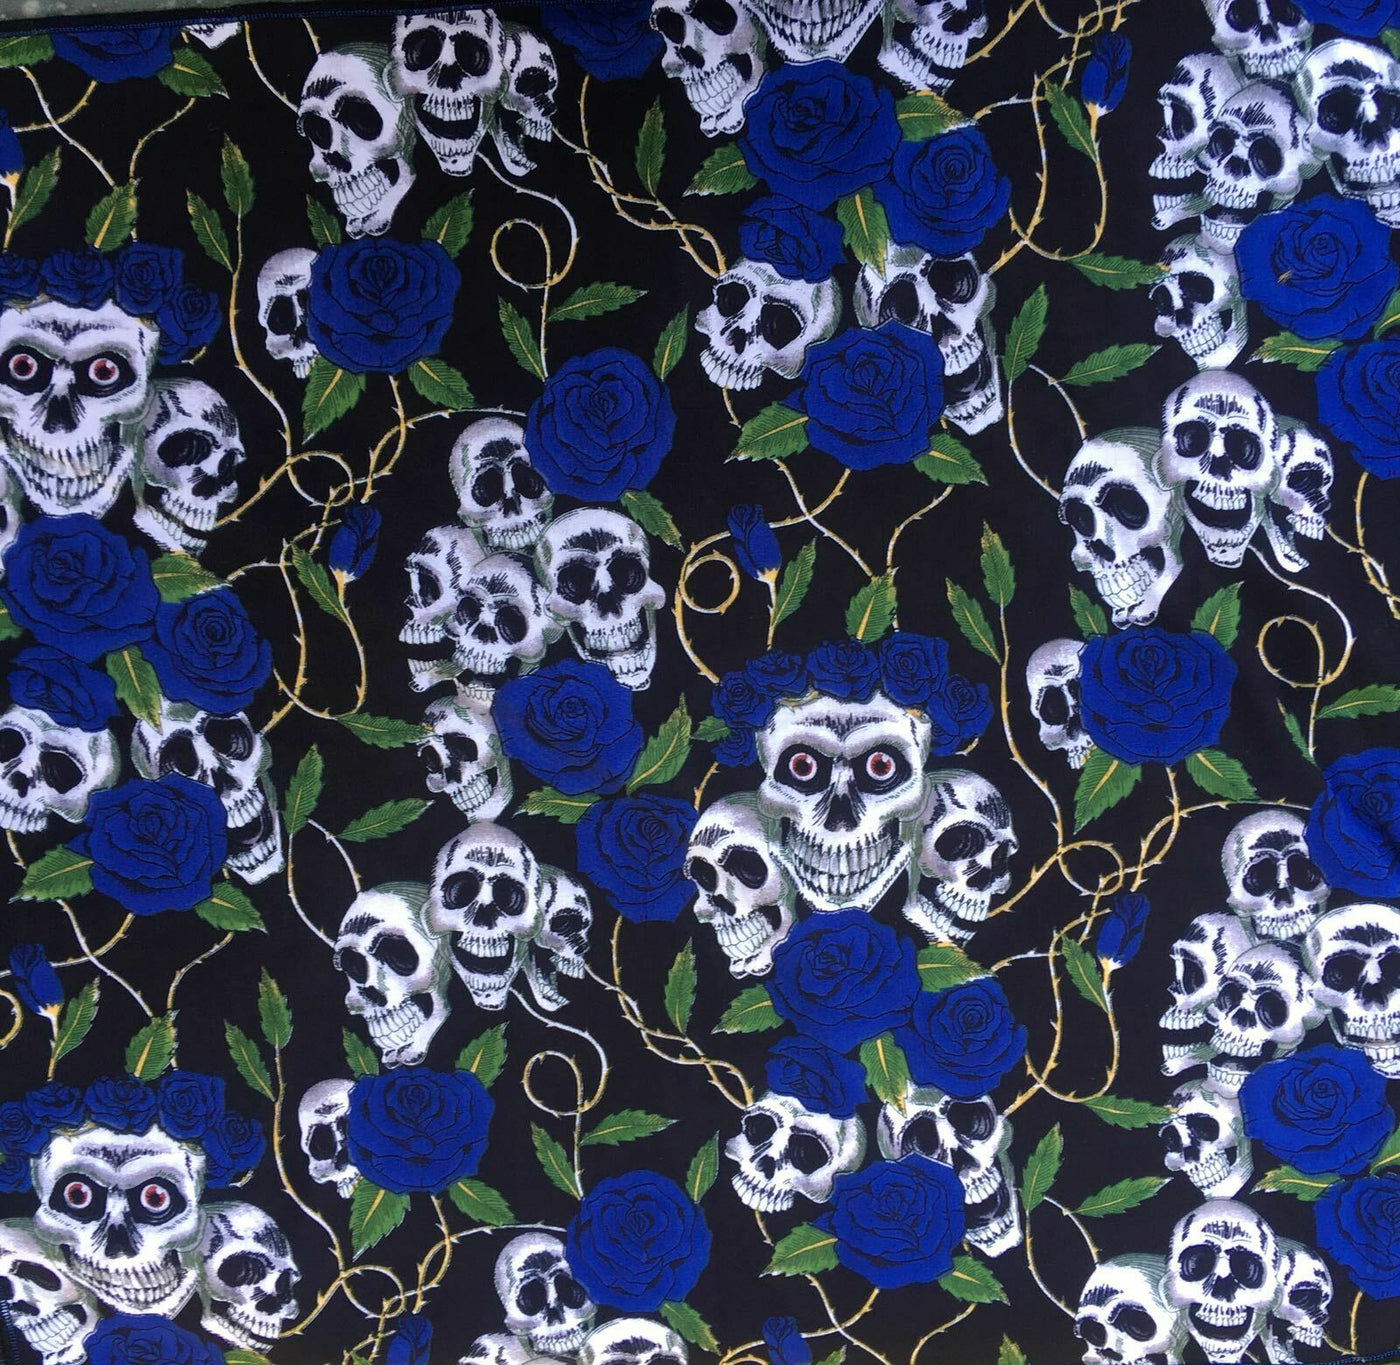 Day of the Dead Skull Rose & Thorns 100% Cotton Fabric for Face Masks